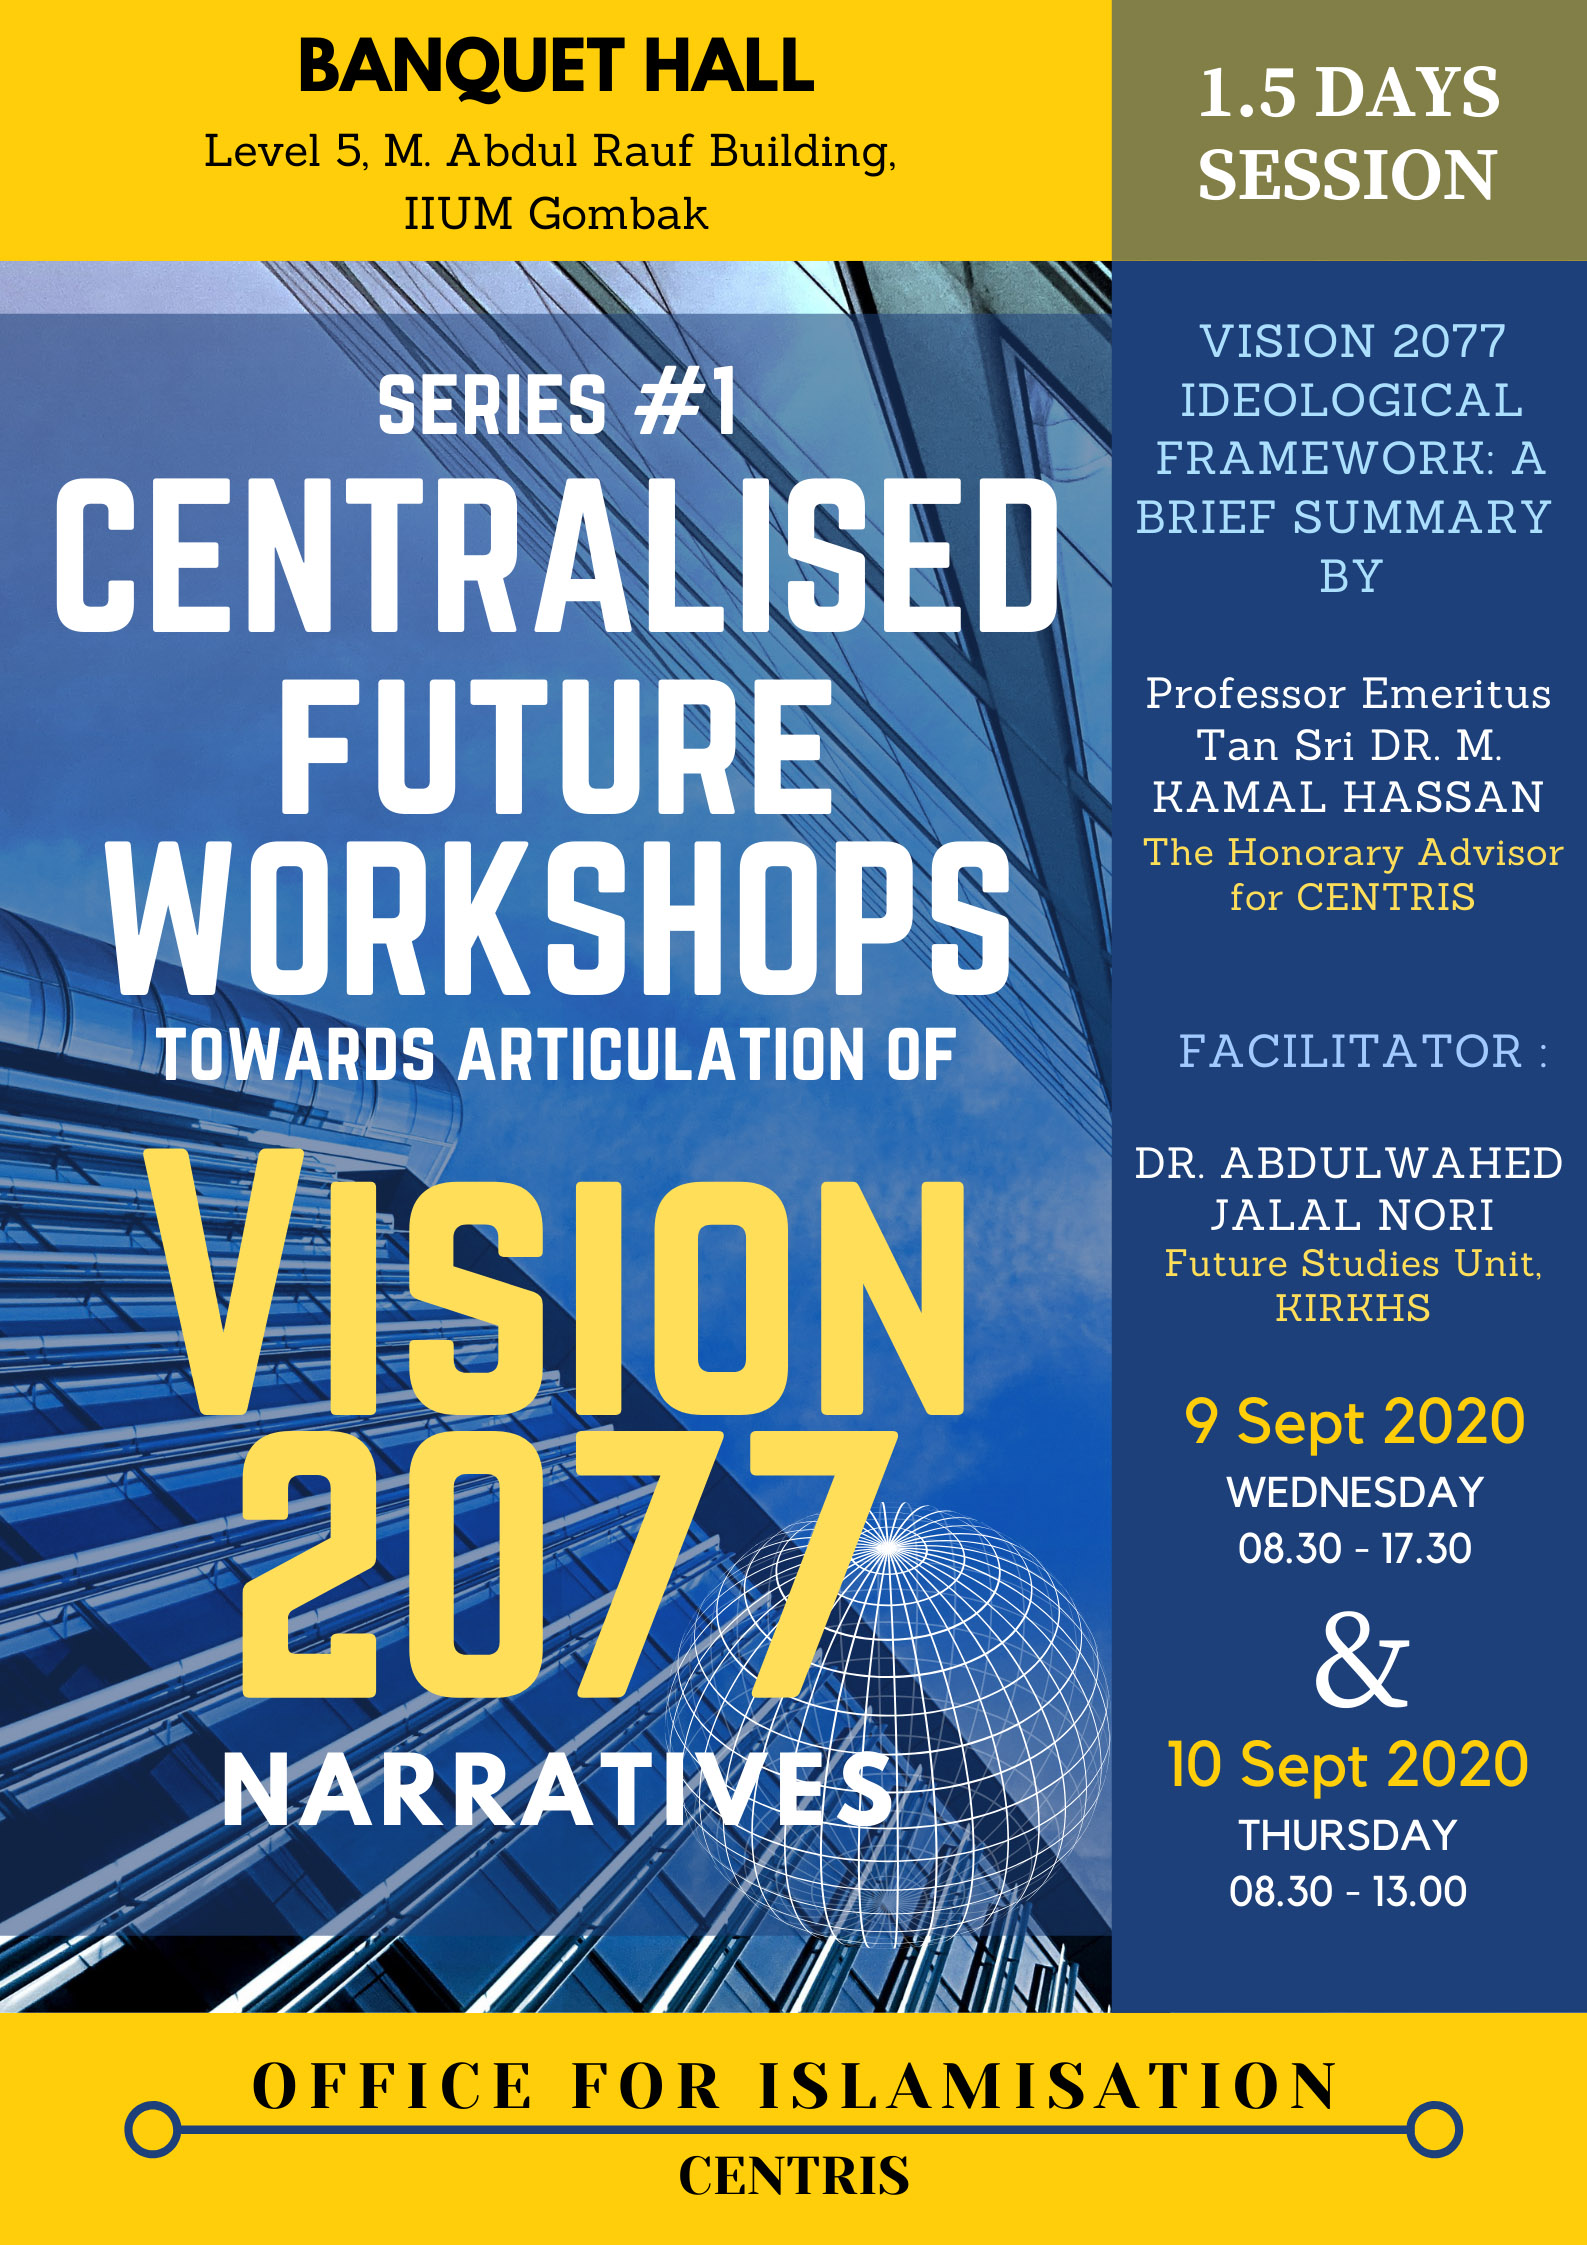 SERIES #1 CENTRALISED  FUTURE WORKSHOPS TOWARDS ARTICULATION OF VISION 2077